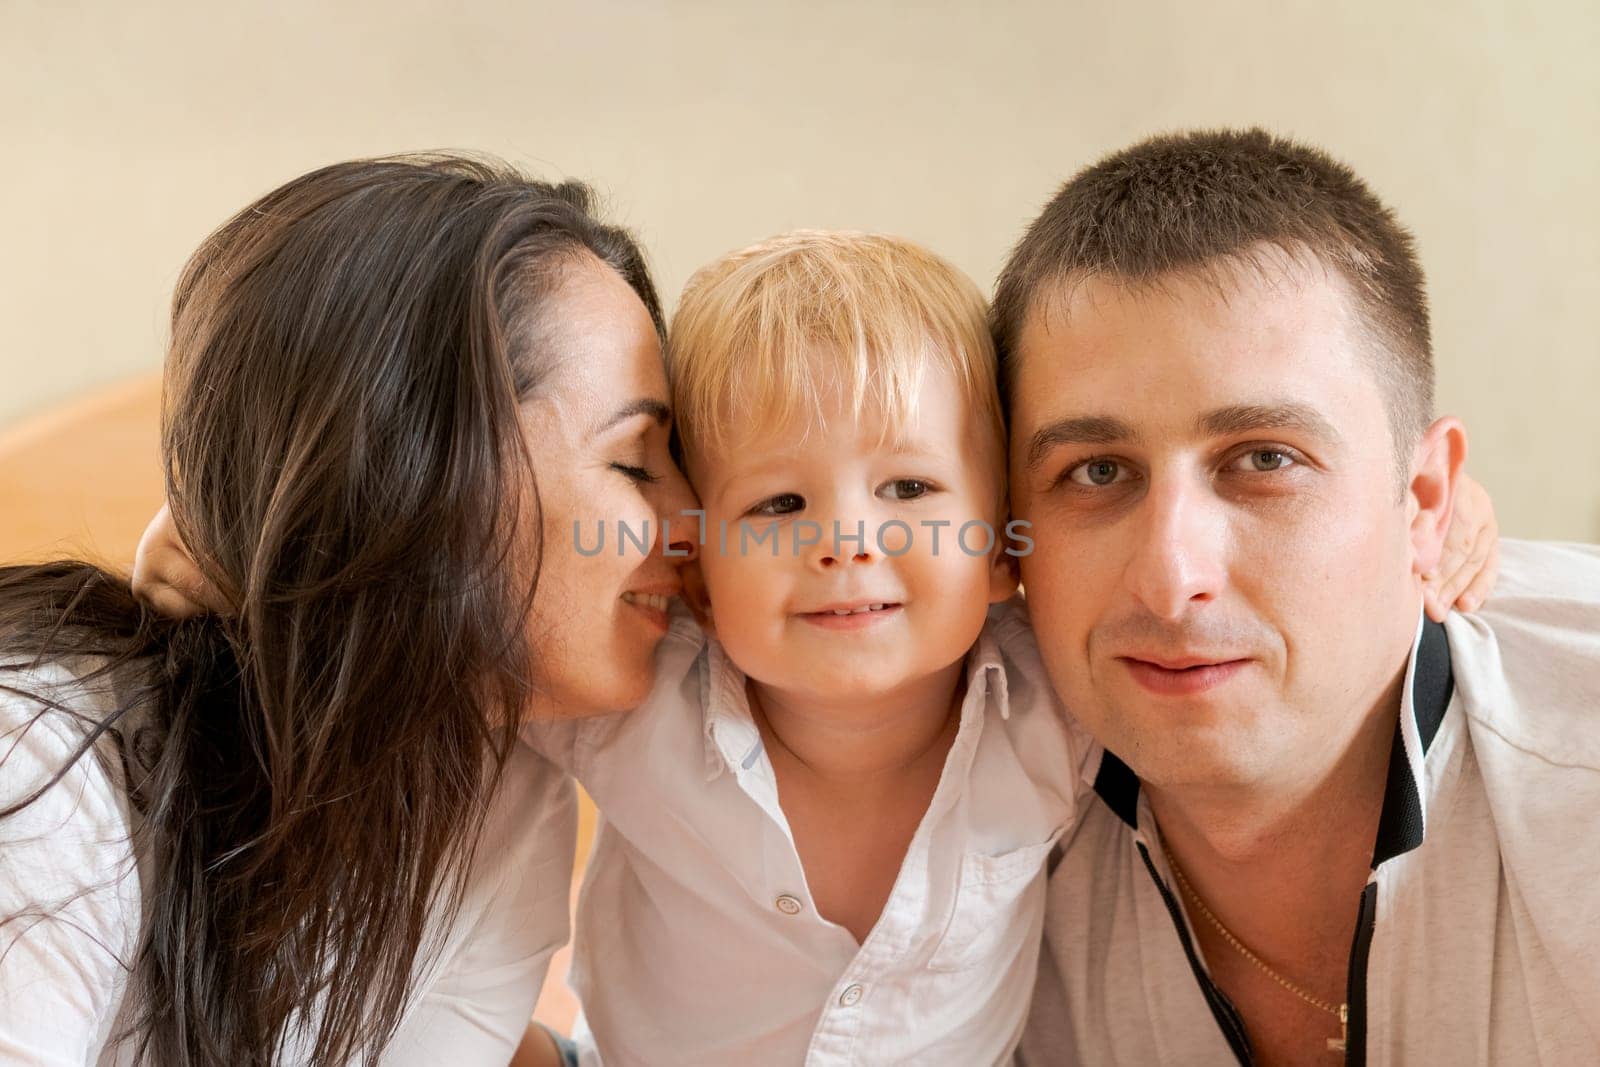 happy family lying on the bed and hugging, mom dad and little son